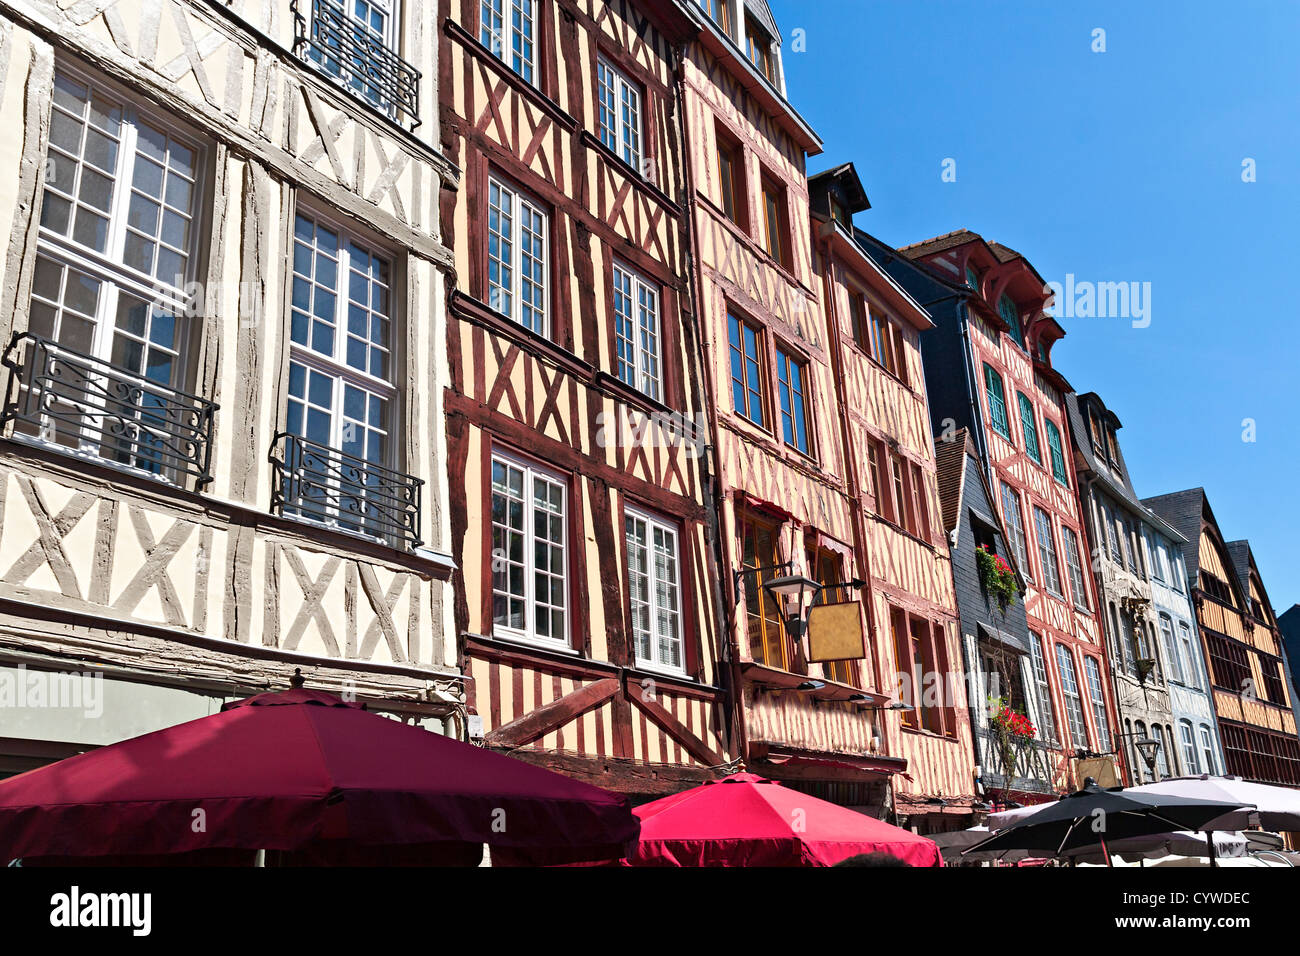 Half-Timbered Houses in Rouen, Normandy, France Stock Photo